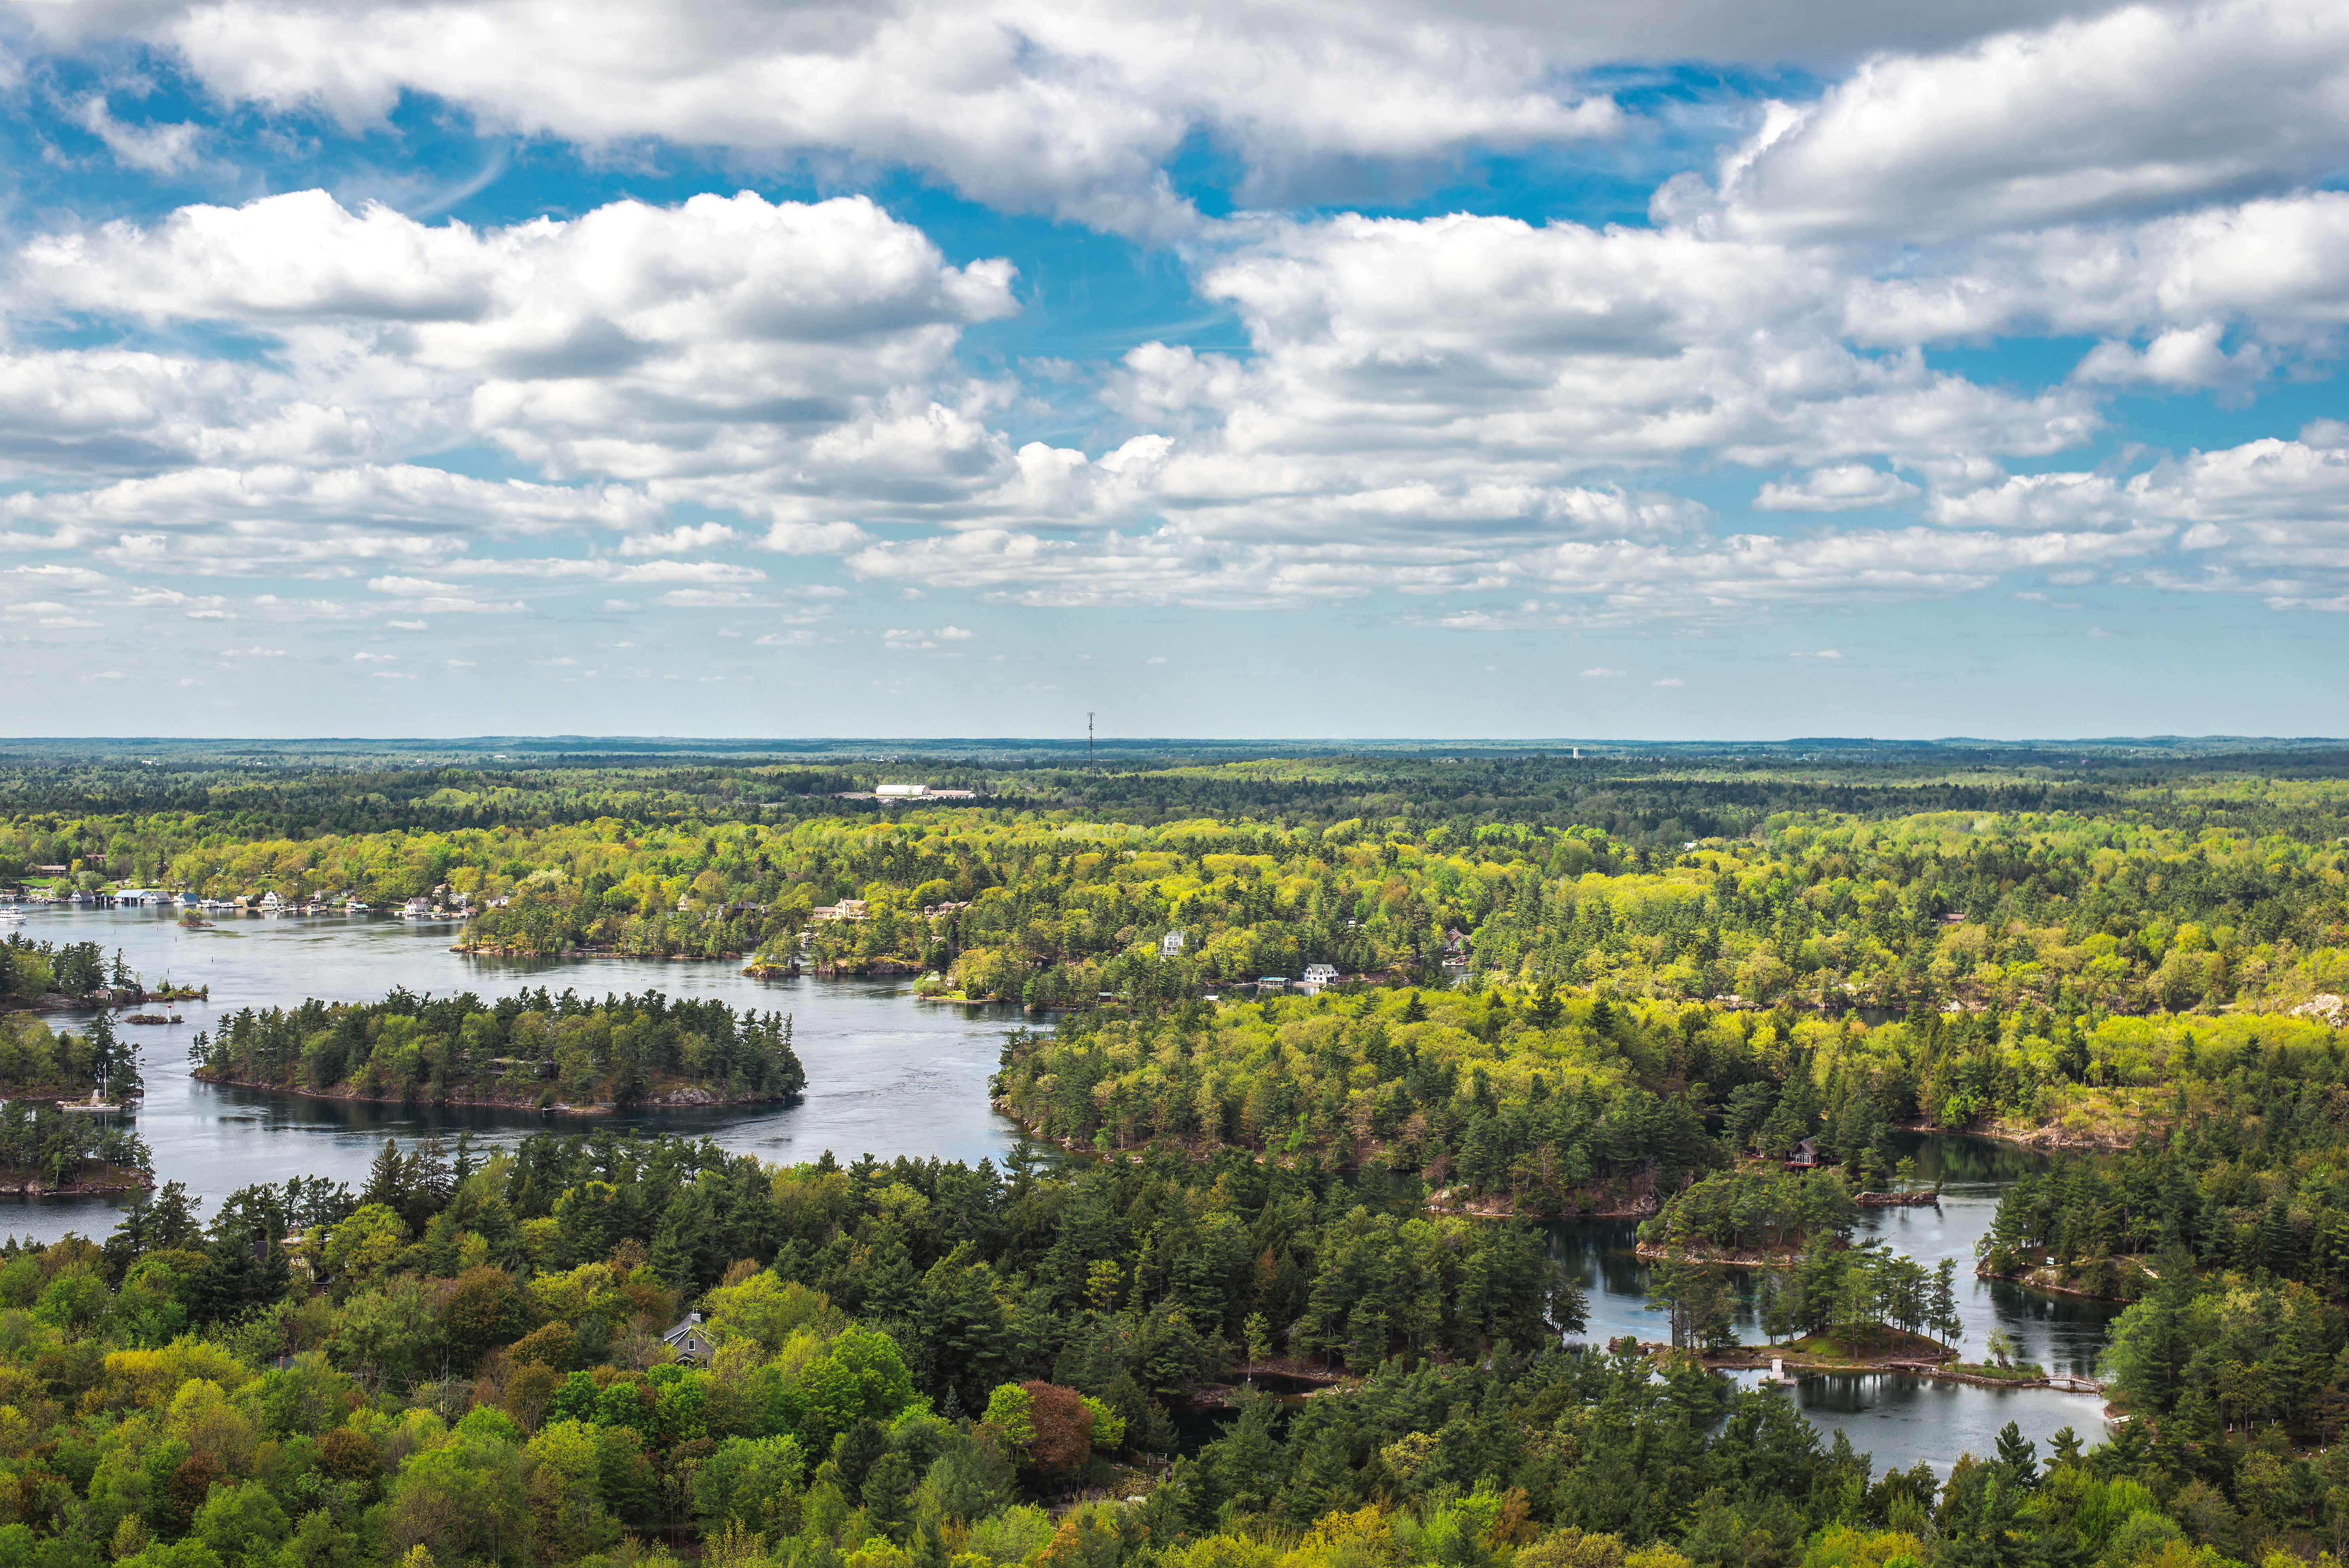 A view of Thousand Islands National Park